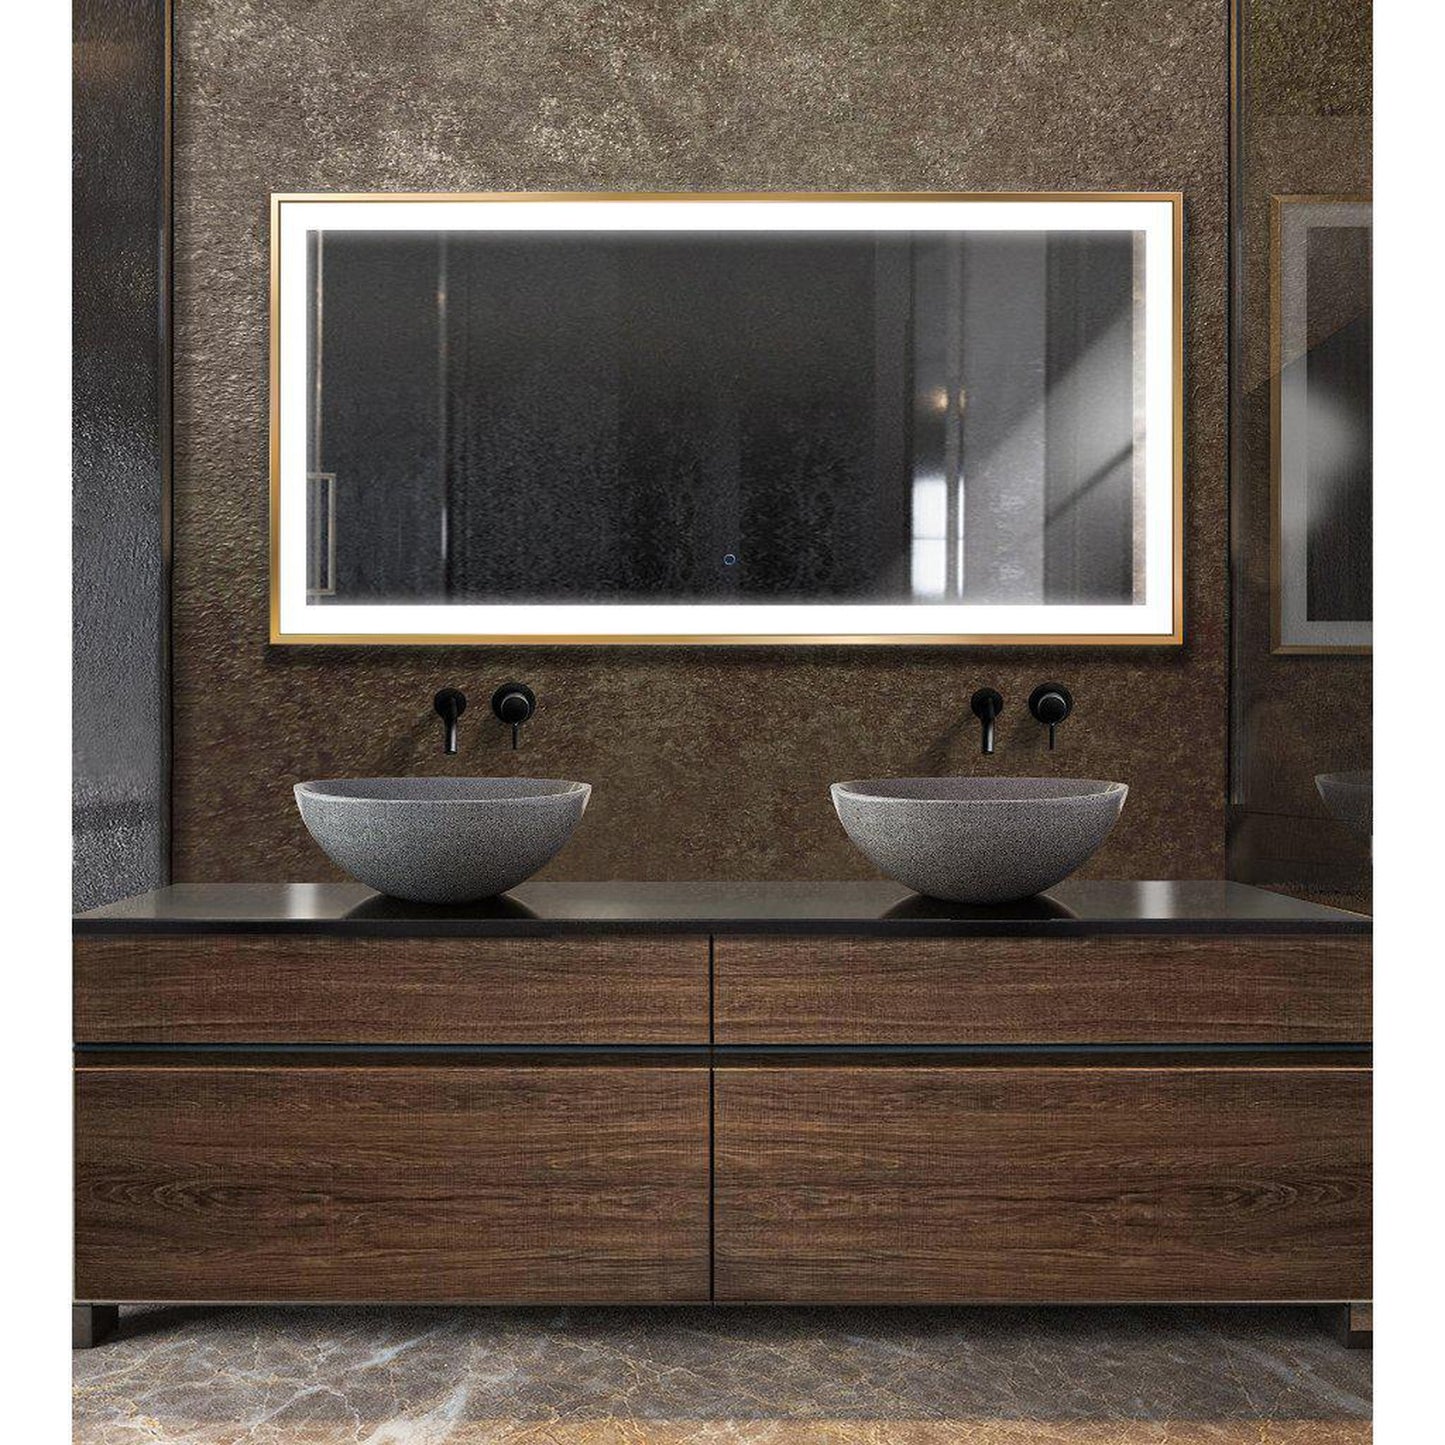 Krugg Reflections Soho 60" x 30" 5000K Rectangular Matte Gold Wall-Mounted Framed LED Bathroom Vanity Mirror With Built-in Defogger and Dimmer